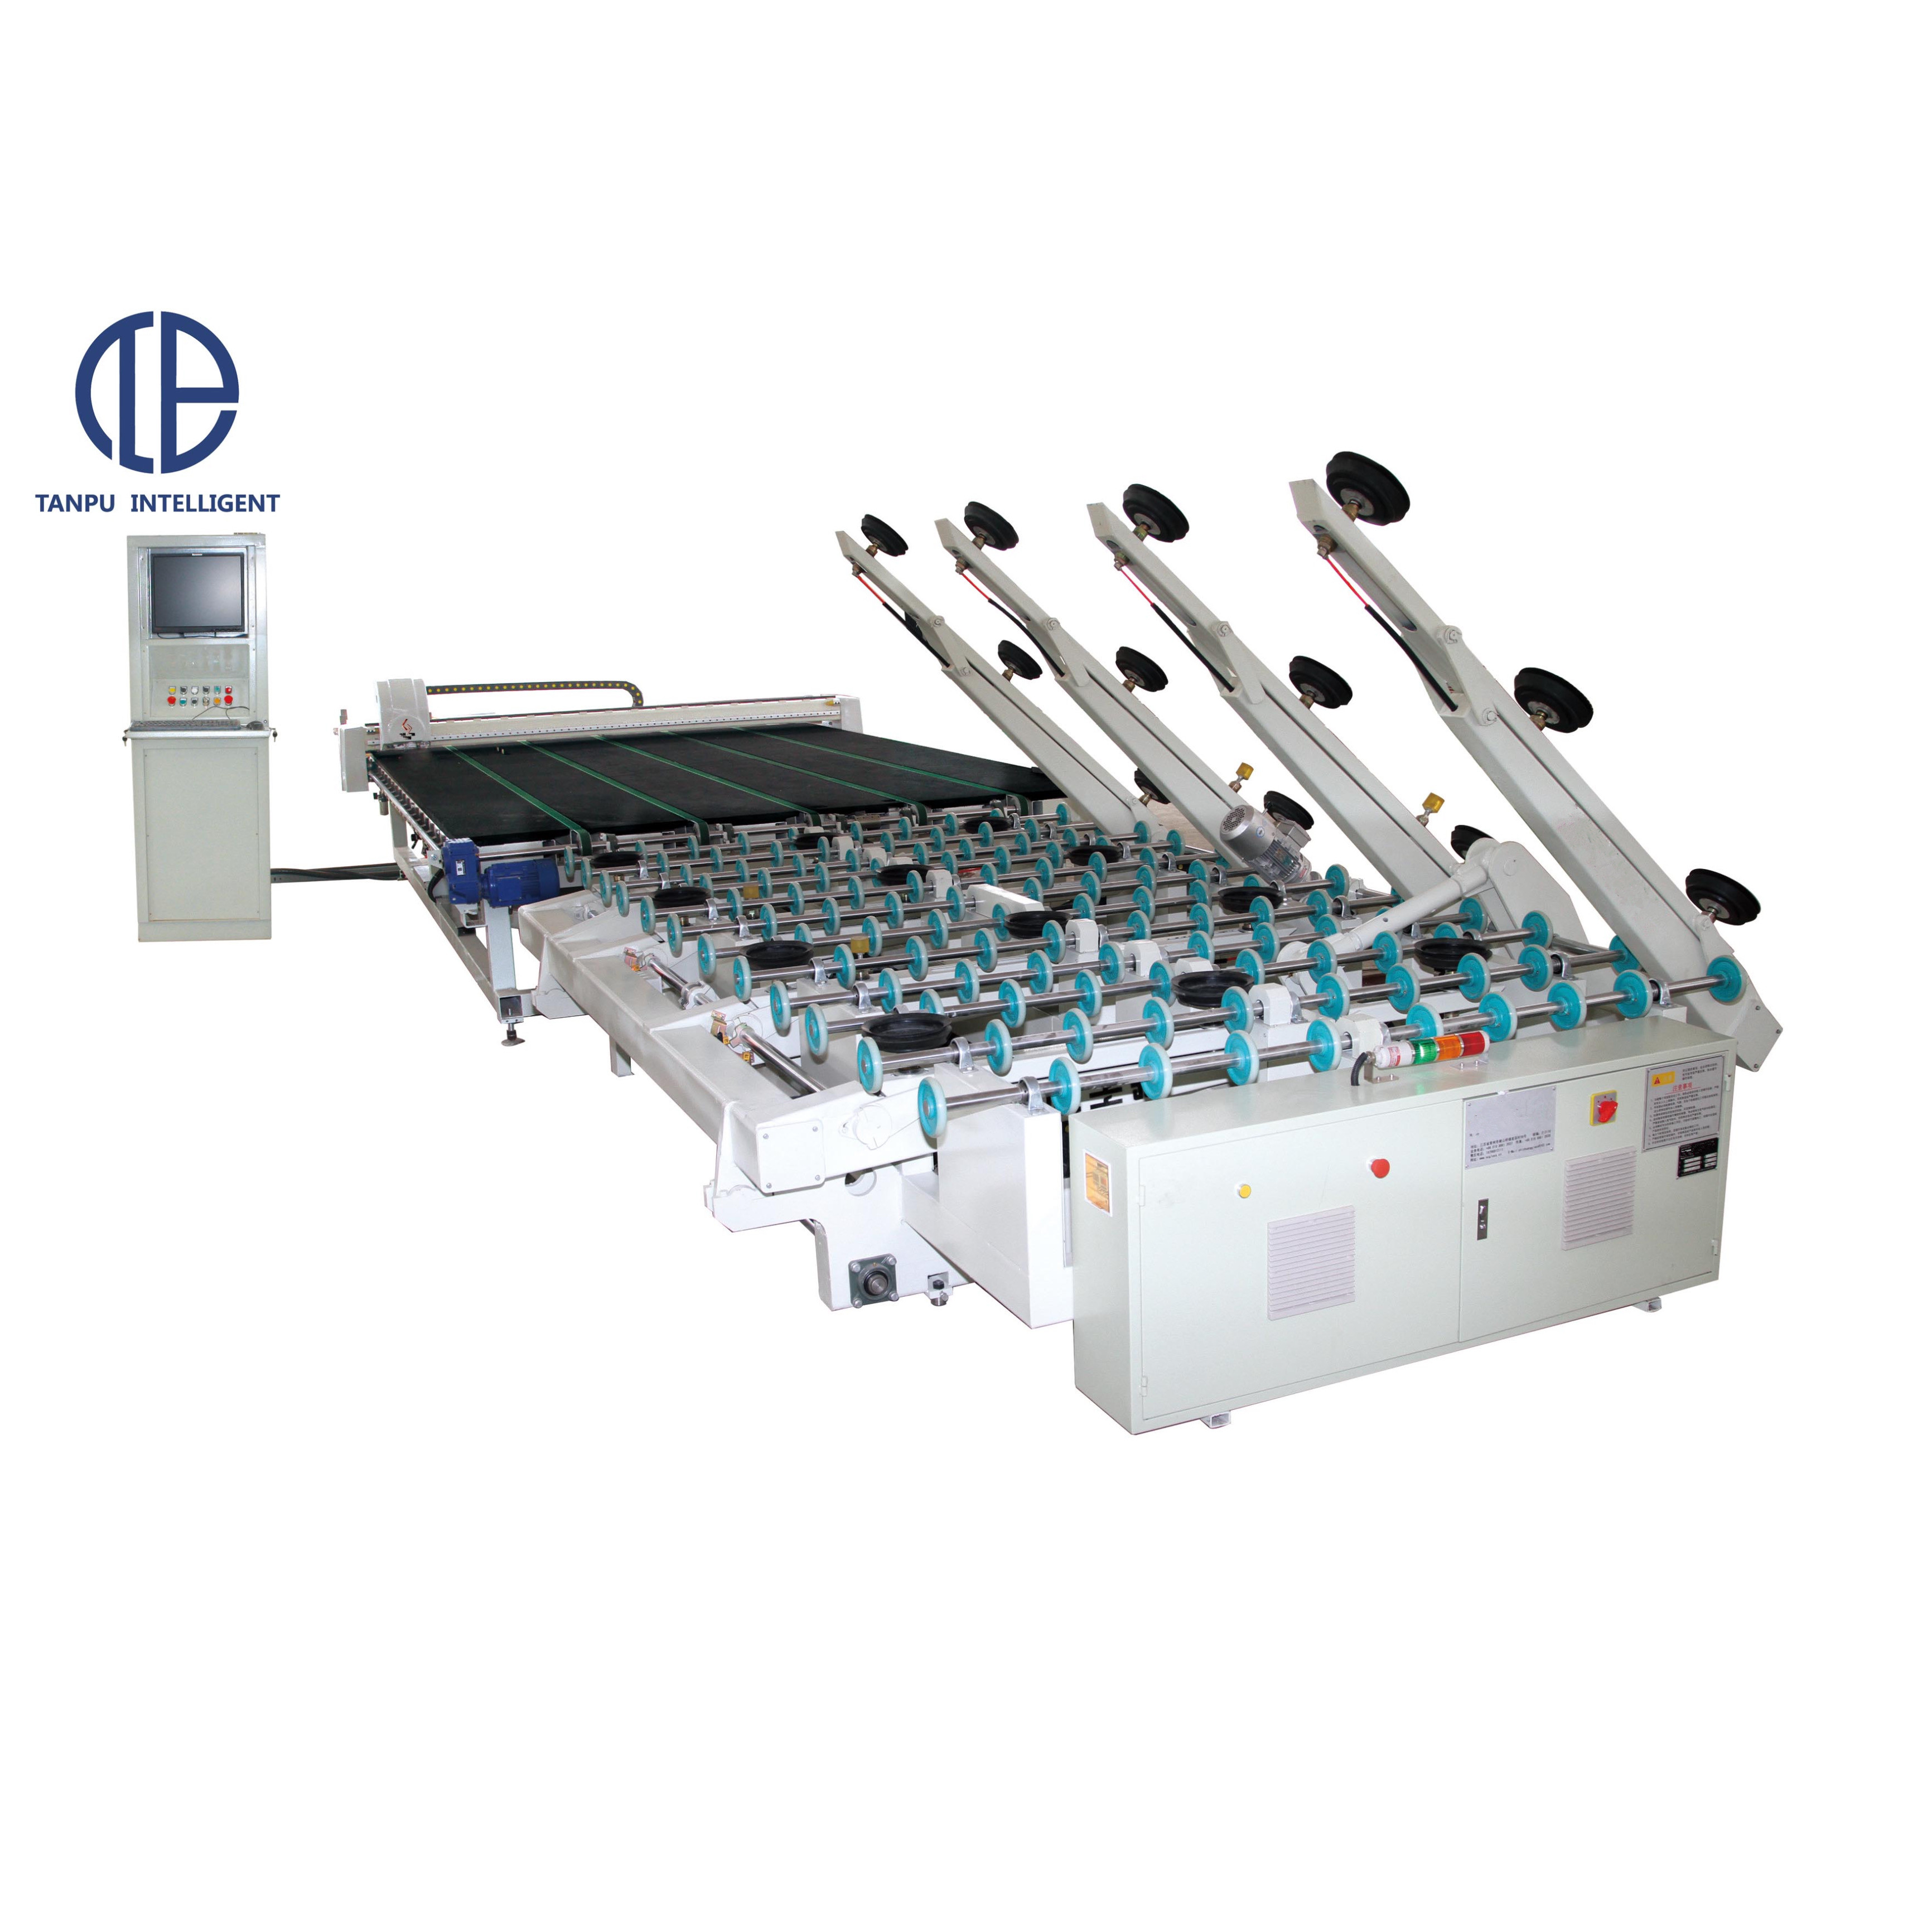 TPL Commercial high efficiency one piece automatic cnc glass cutting machine with loading glass cutting